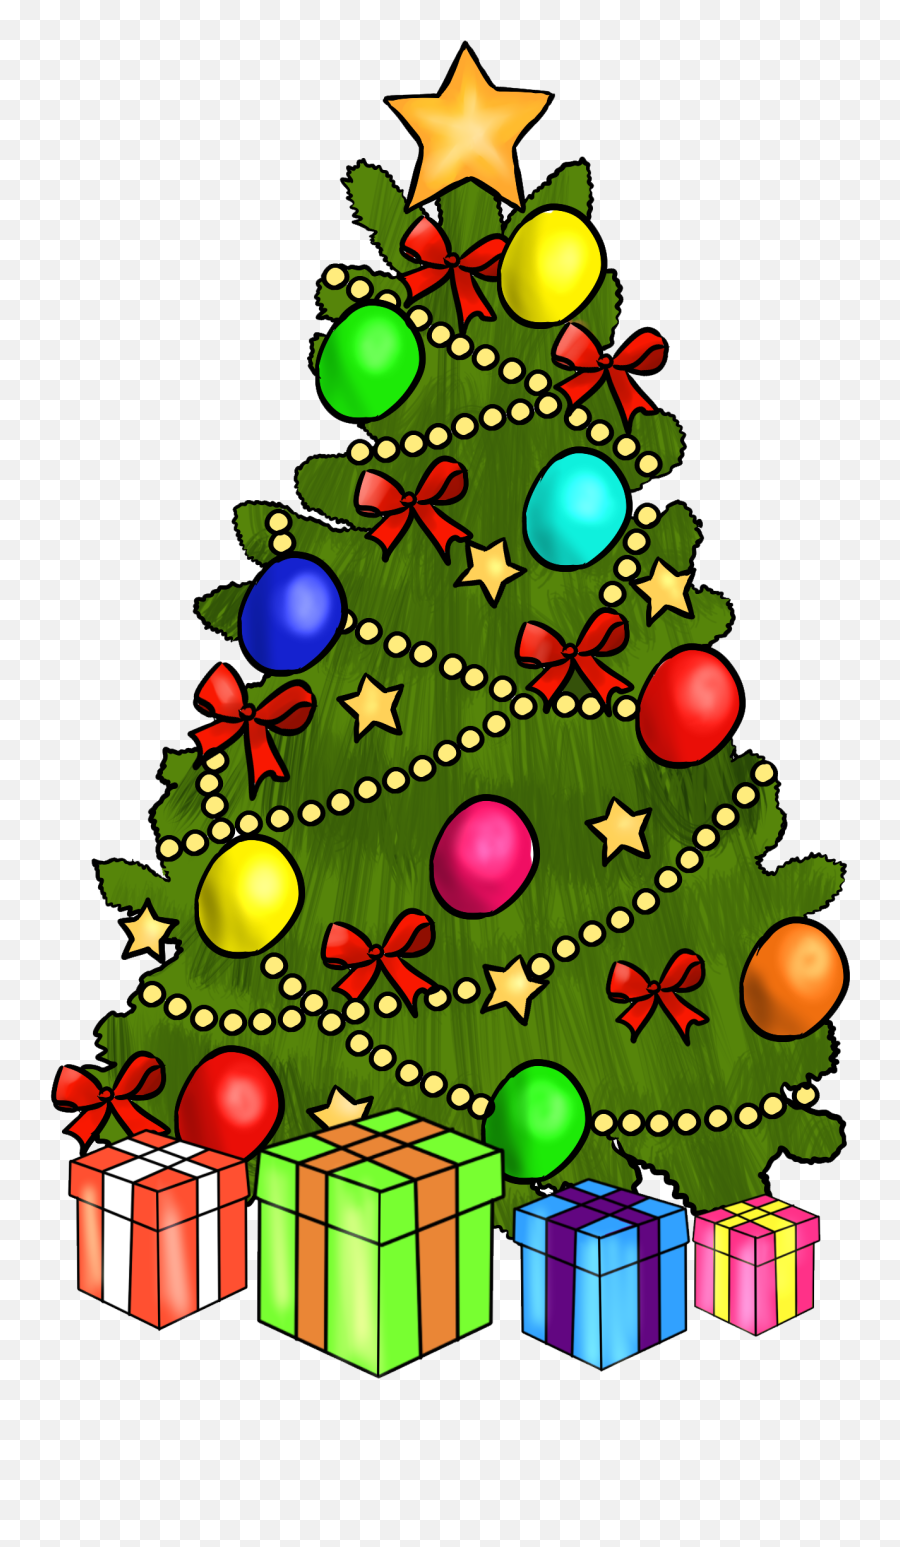 9 Clipart Of Christmas Tree - Preview Icon Clip Art Chr Clip Art Christmas Images Free Png,Christmas Tree Icon